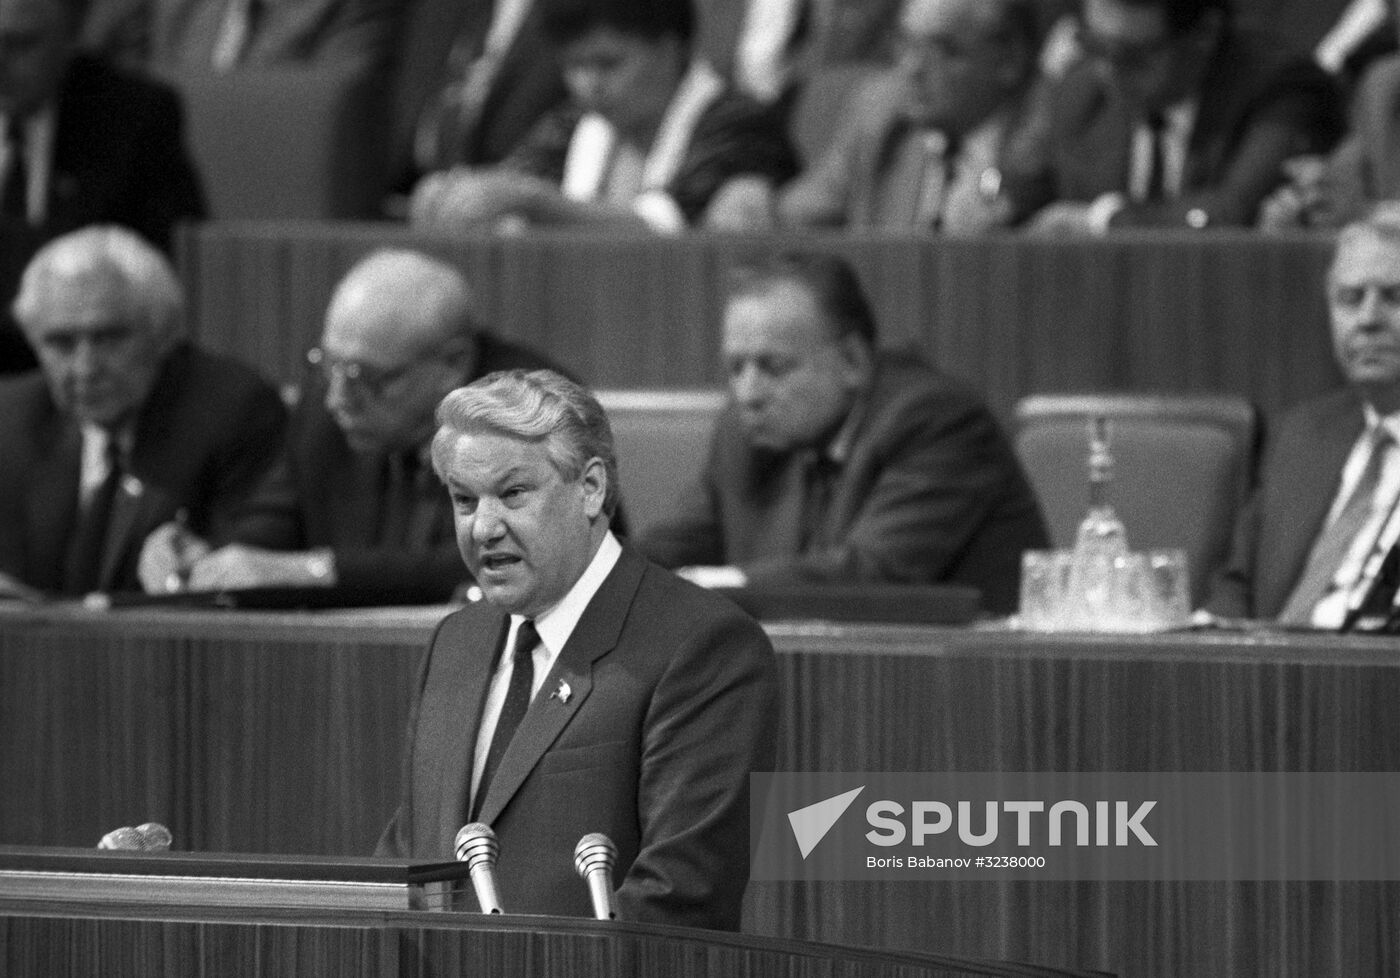 Boris Yeltsin at 19th Party Conference of the Communist Party of the Soviet Union